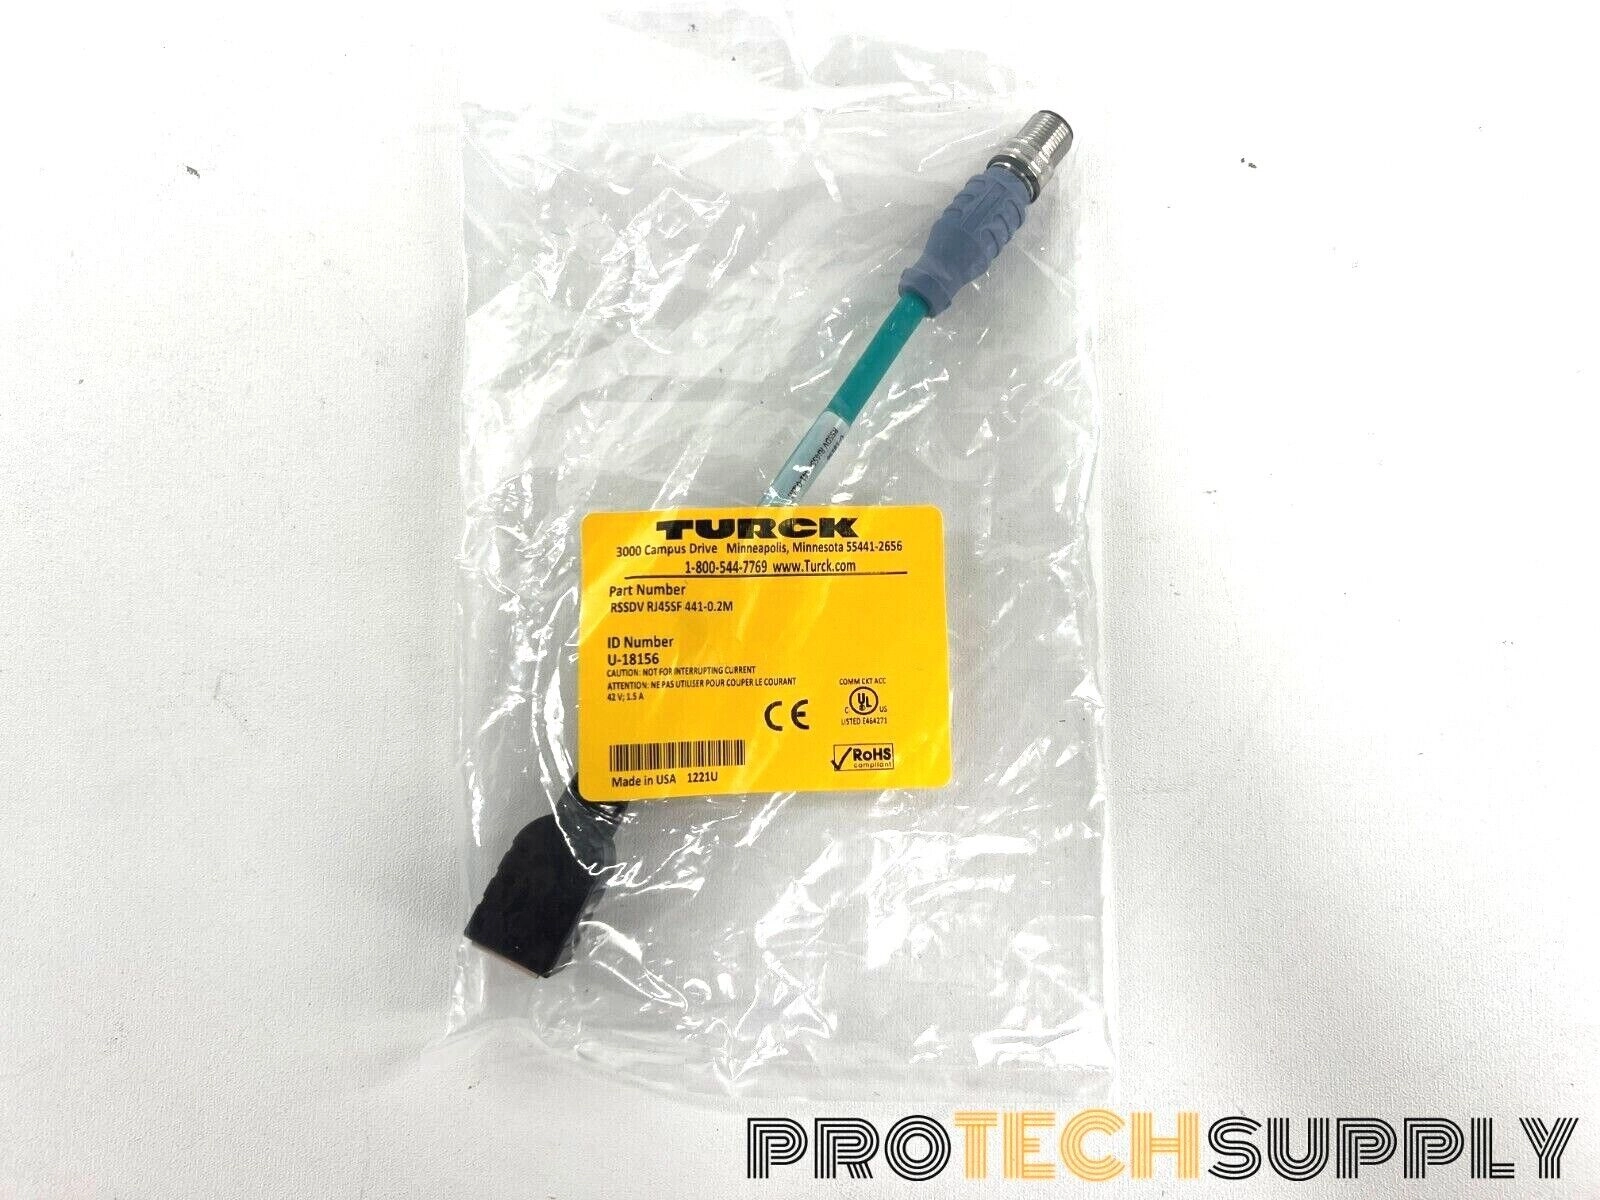 NEW Turck RSSDV RJ45SF 441-0.2M 0.2 Meter Cable wi